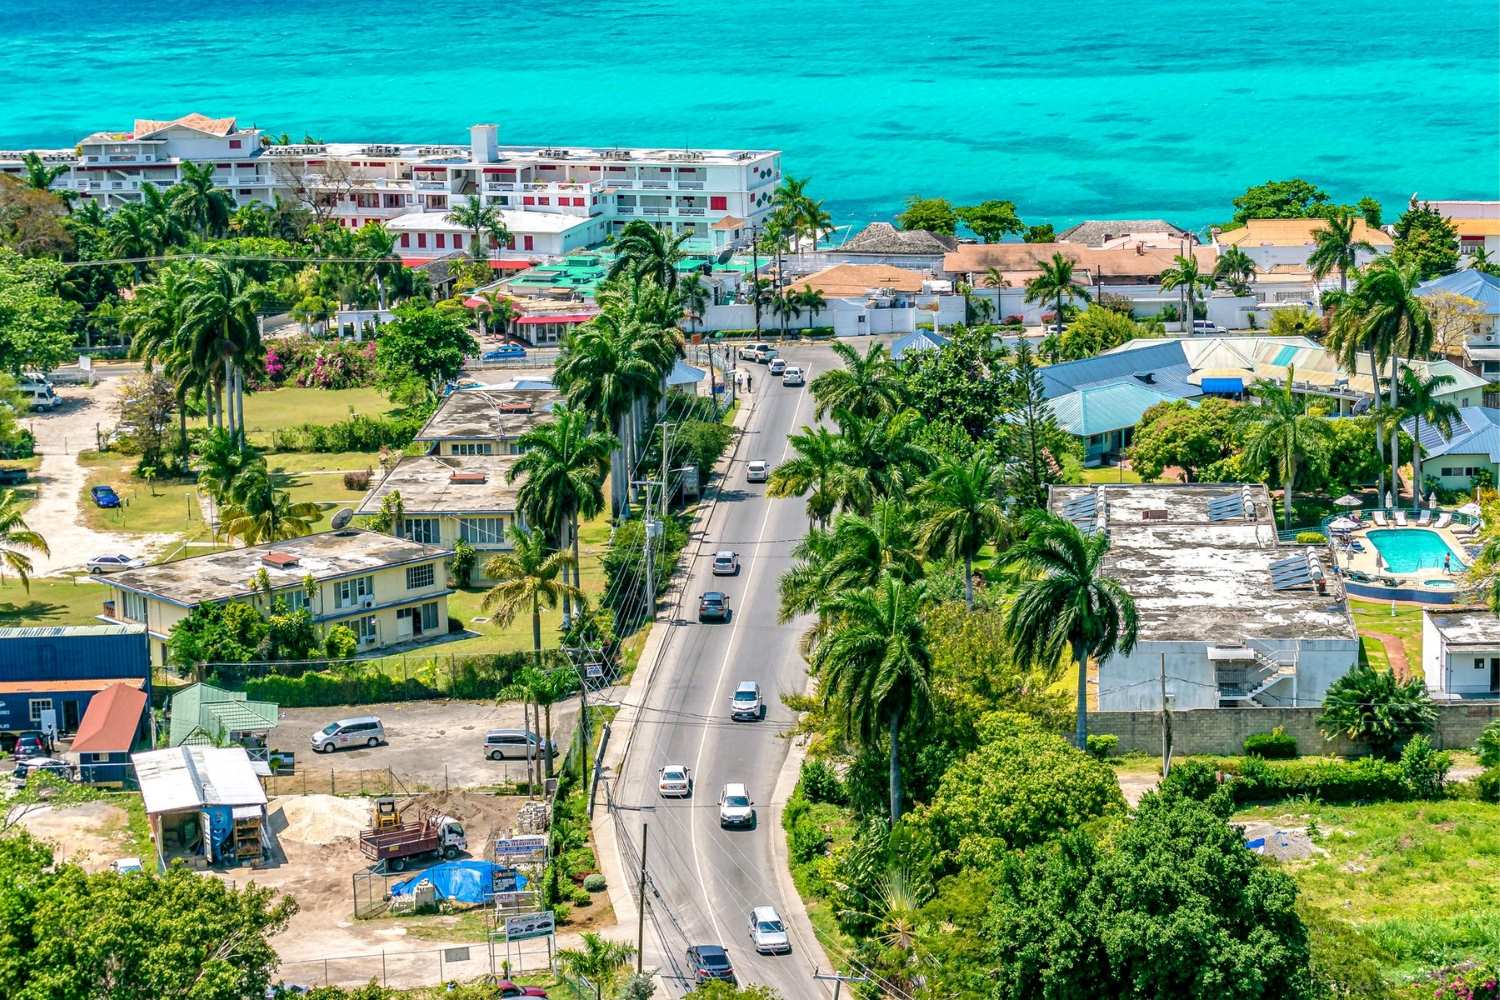 The Ultimate Guide To Jamaica’s ZIP Code – Everything You Need To Know!